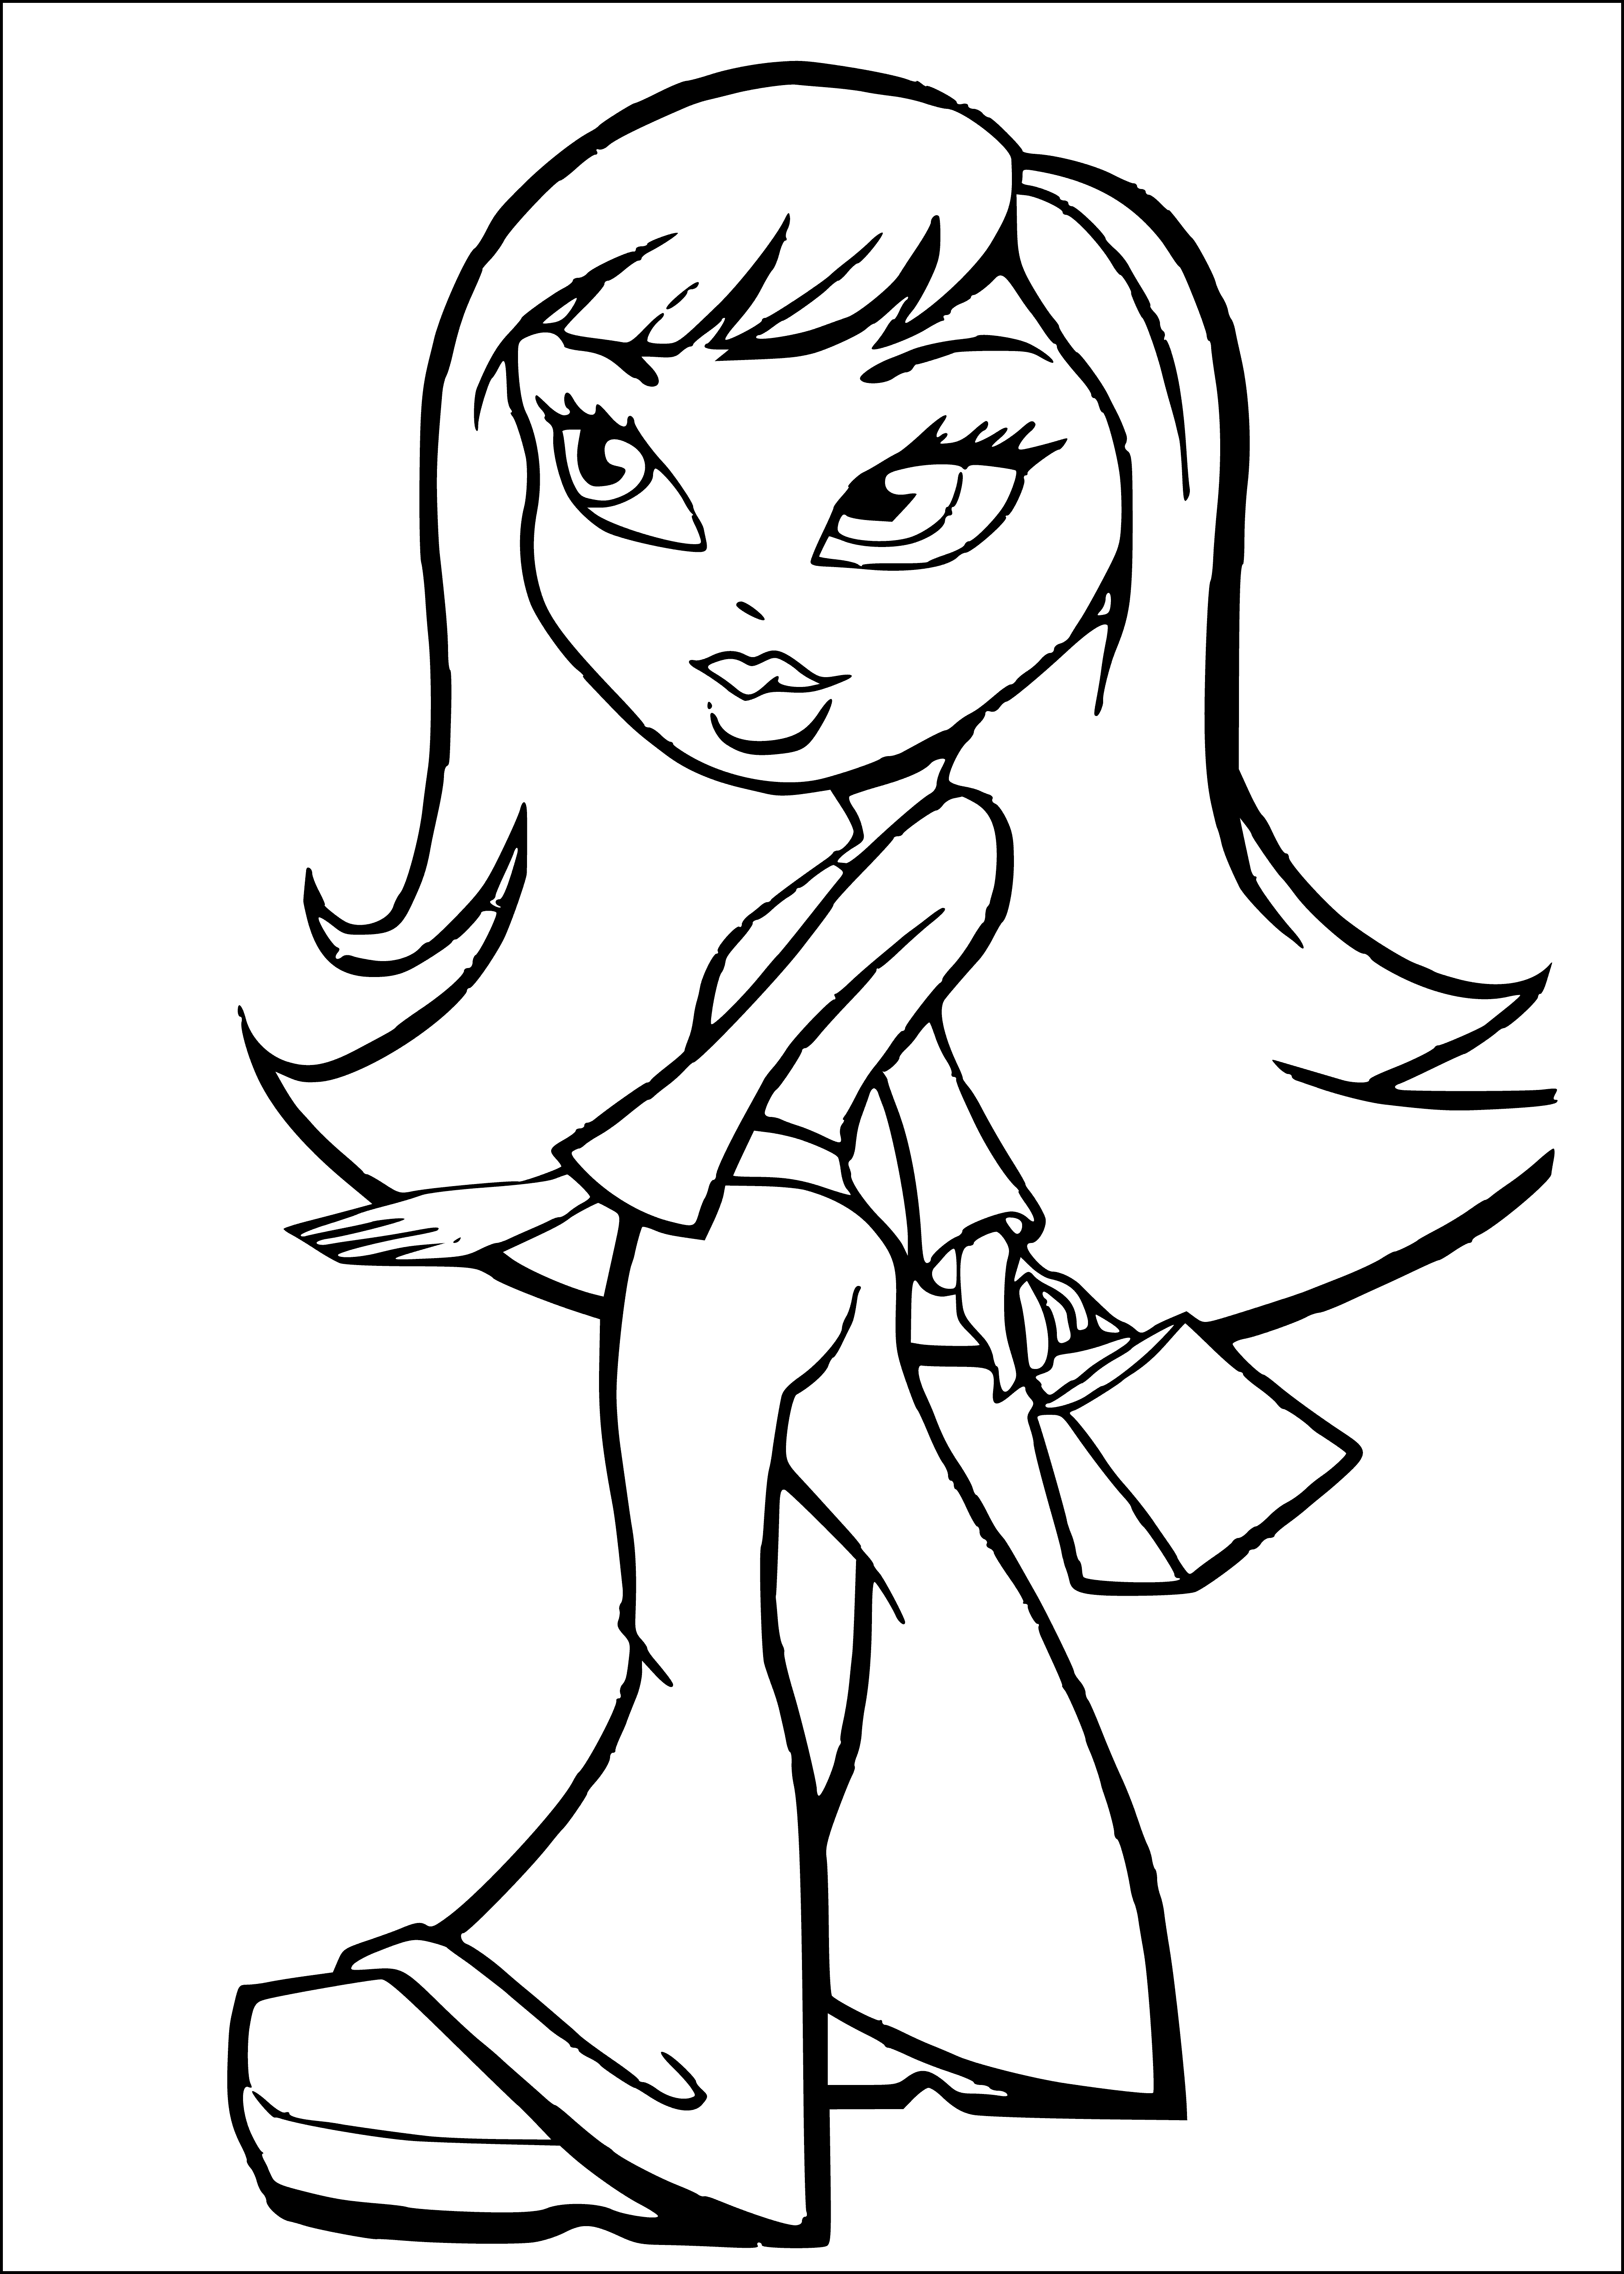 coloring page: Group of girls with long, styled hair, colorful & glittery outfits & big handbags w/ straps.